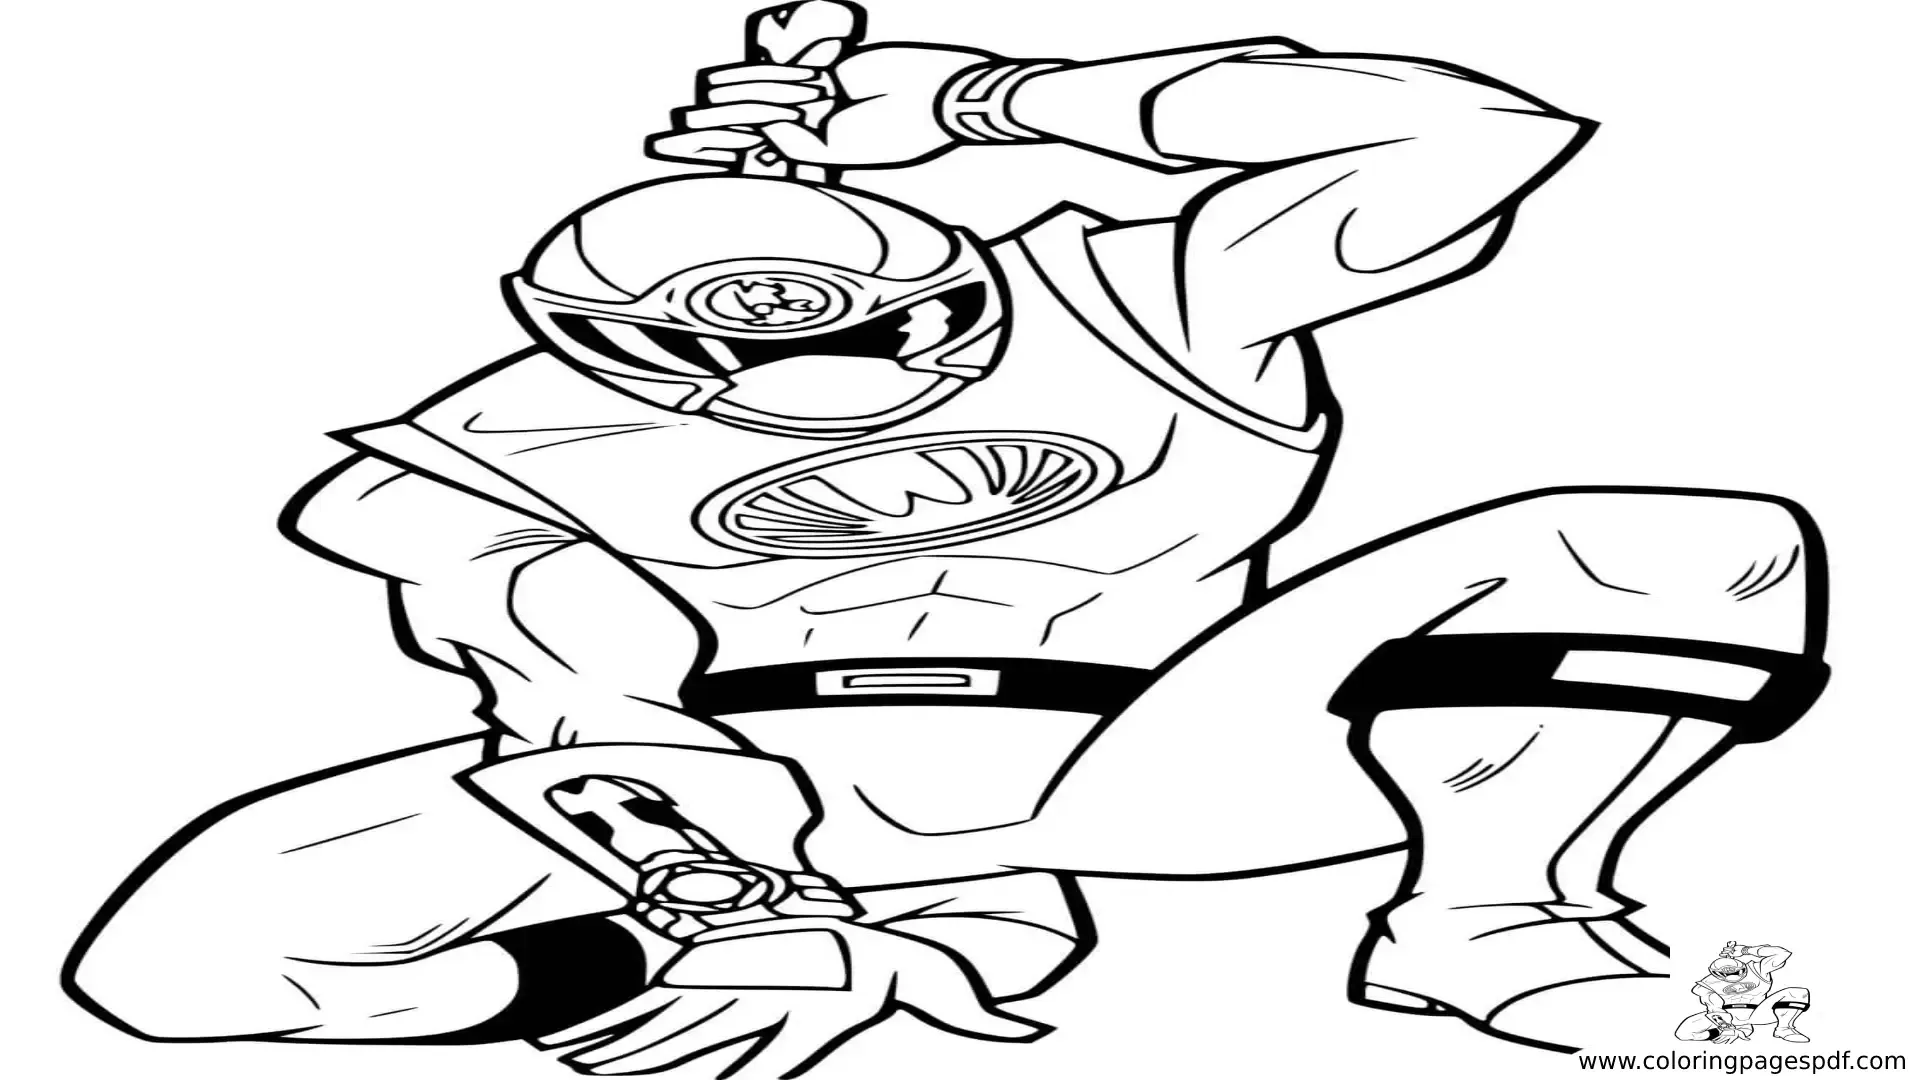 Coloring Pages Of Red Power Ranger Ninja Storm